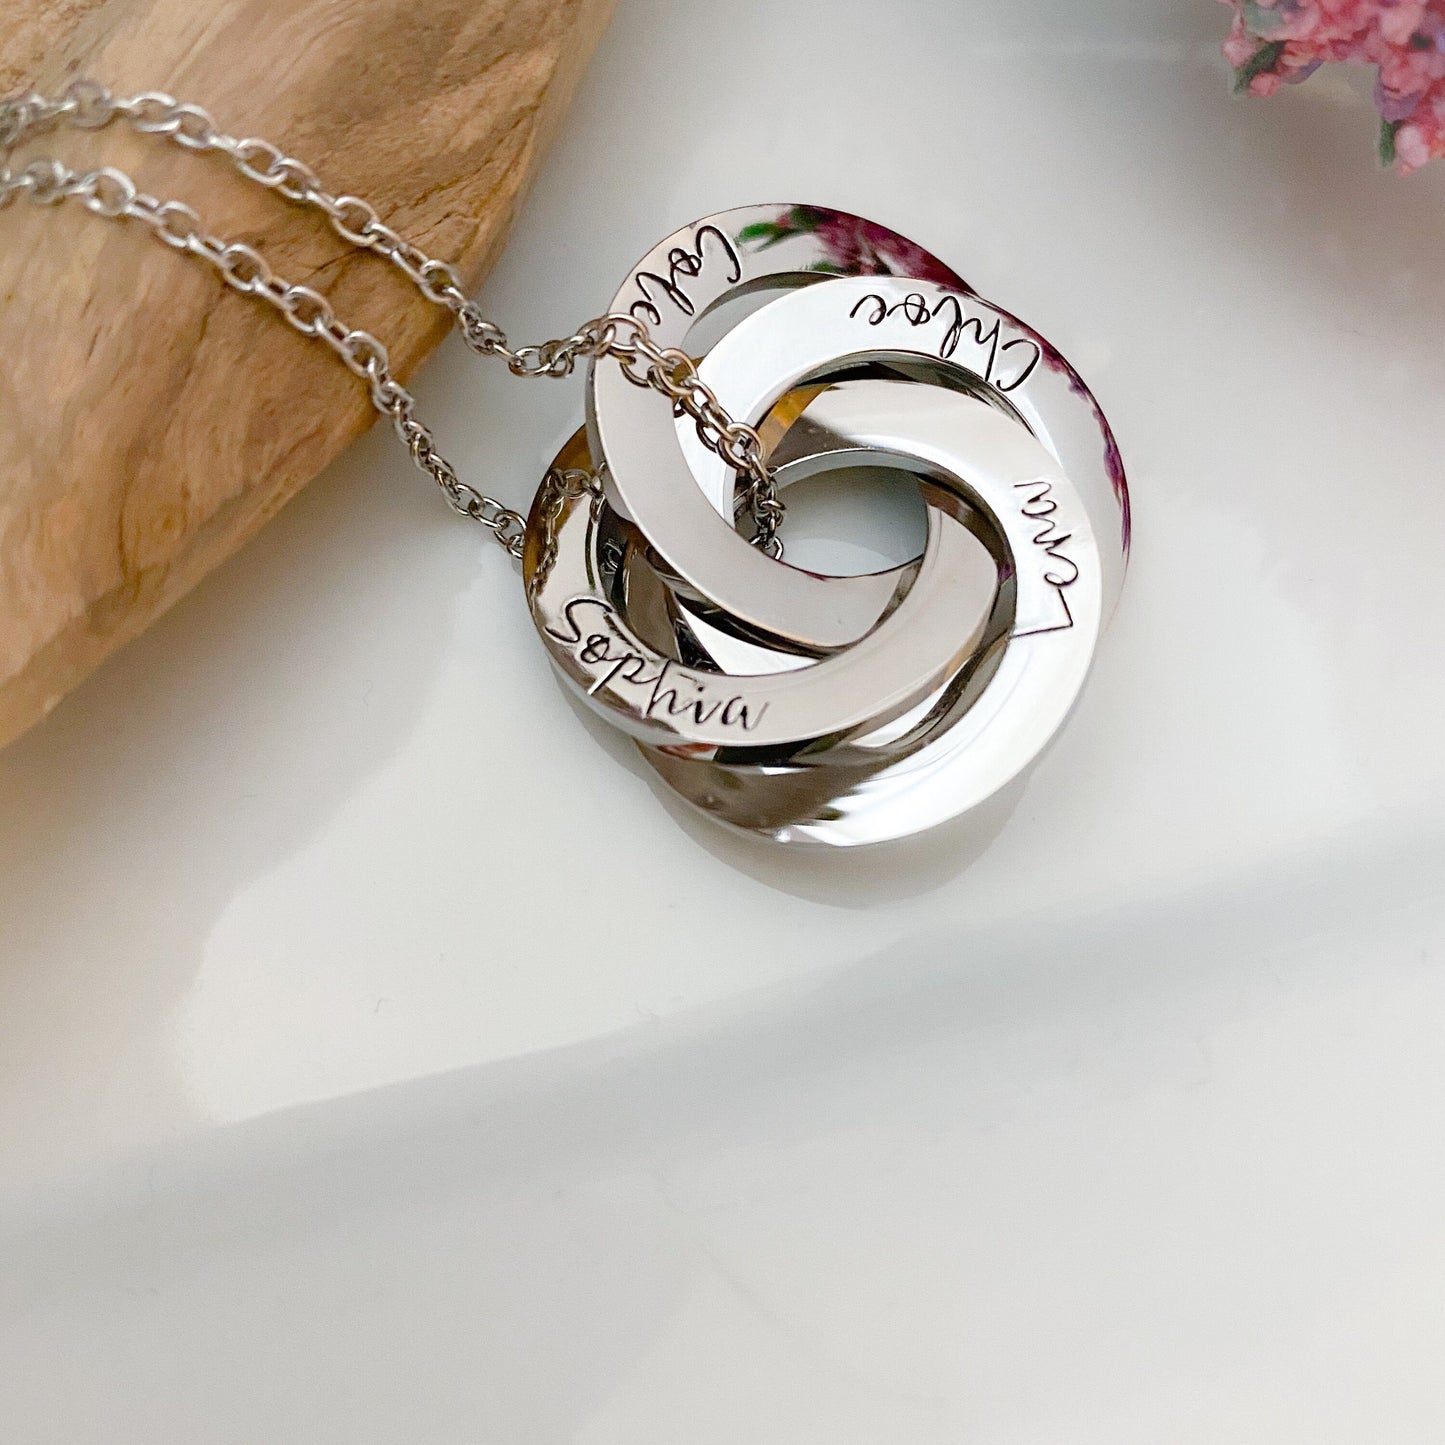 4 Ring necklace--Mothers Name Necklace--Interlocking Ring Necklace